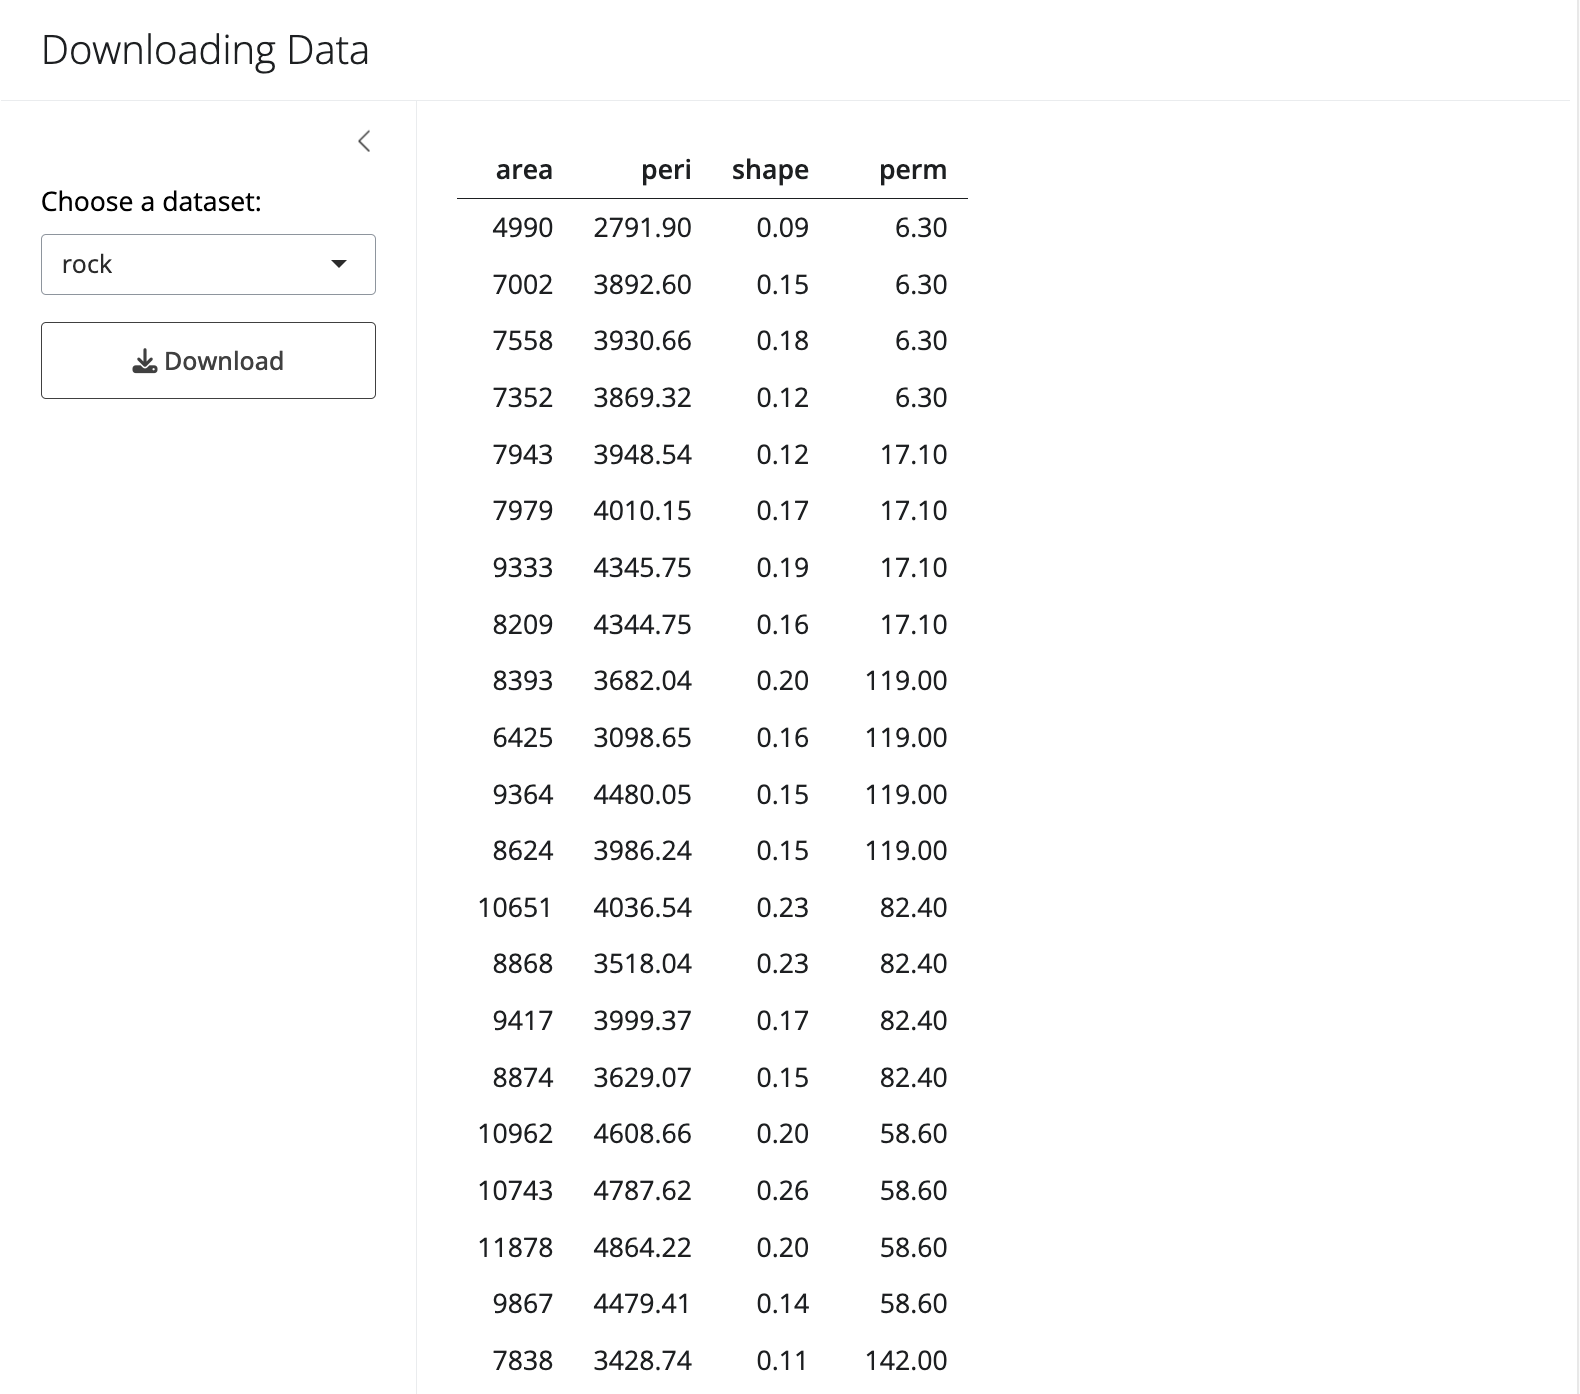 Shiny app for downloading data. Choose a dataset in the left panel and a view of the selected file on the right.